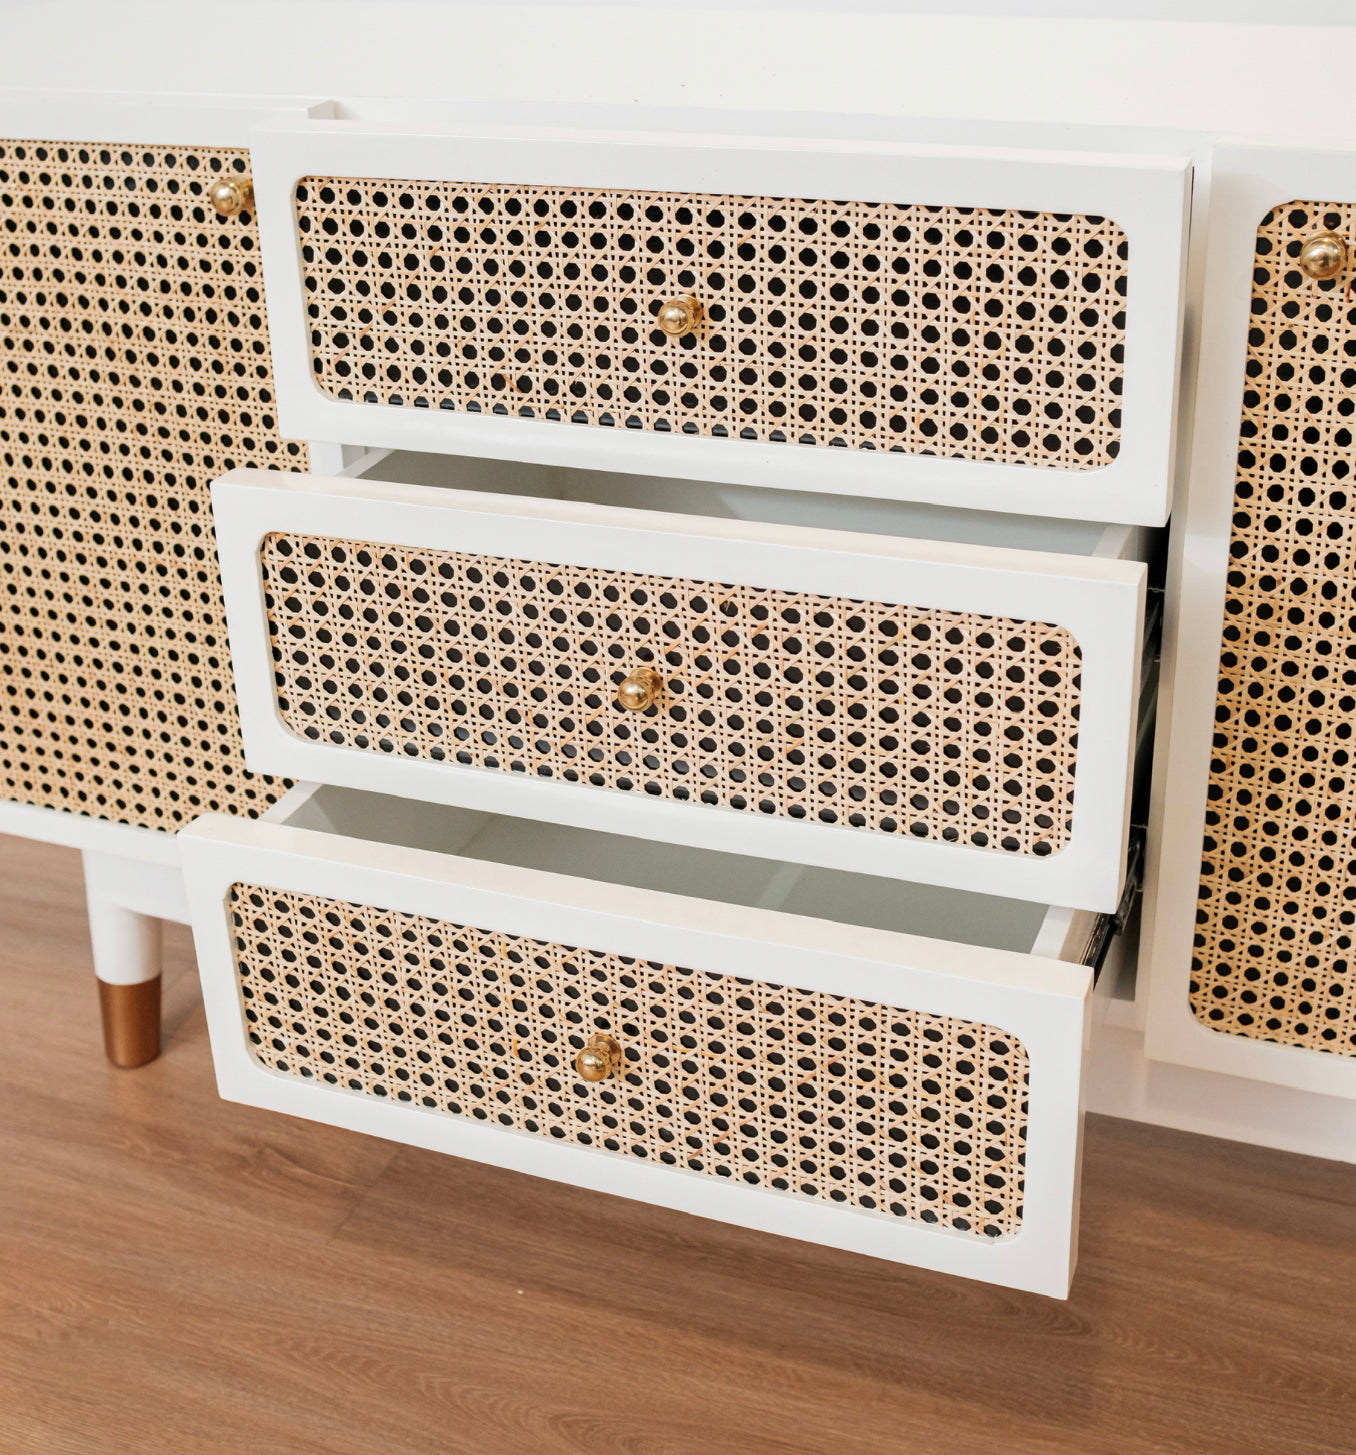 Daisy White Sideboard Cabinet